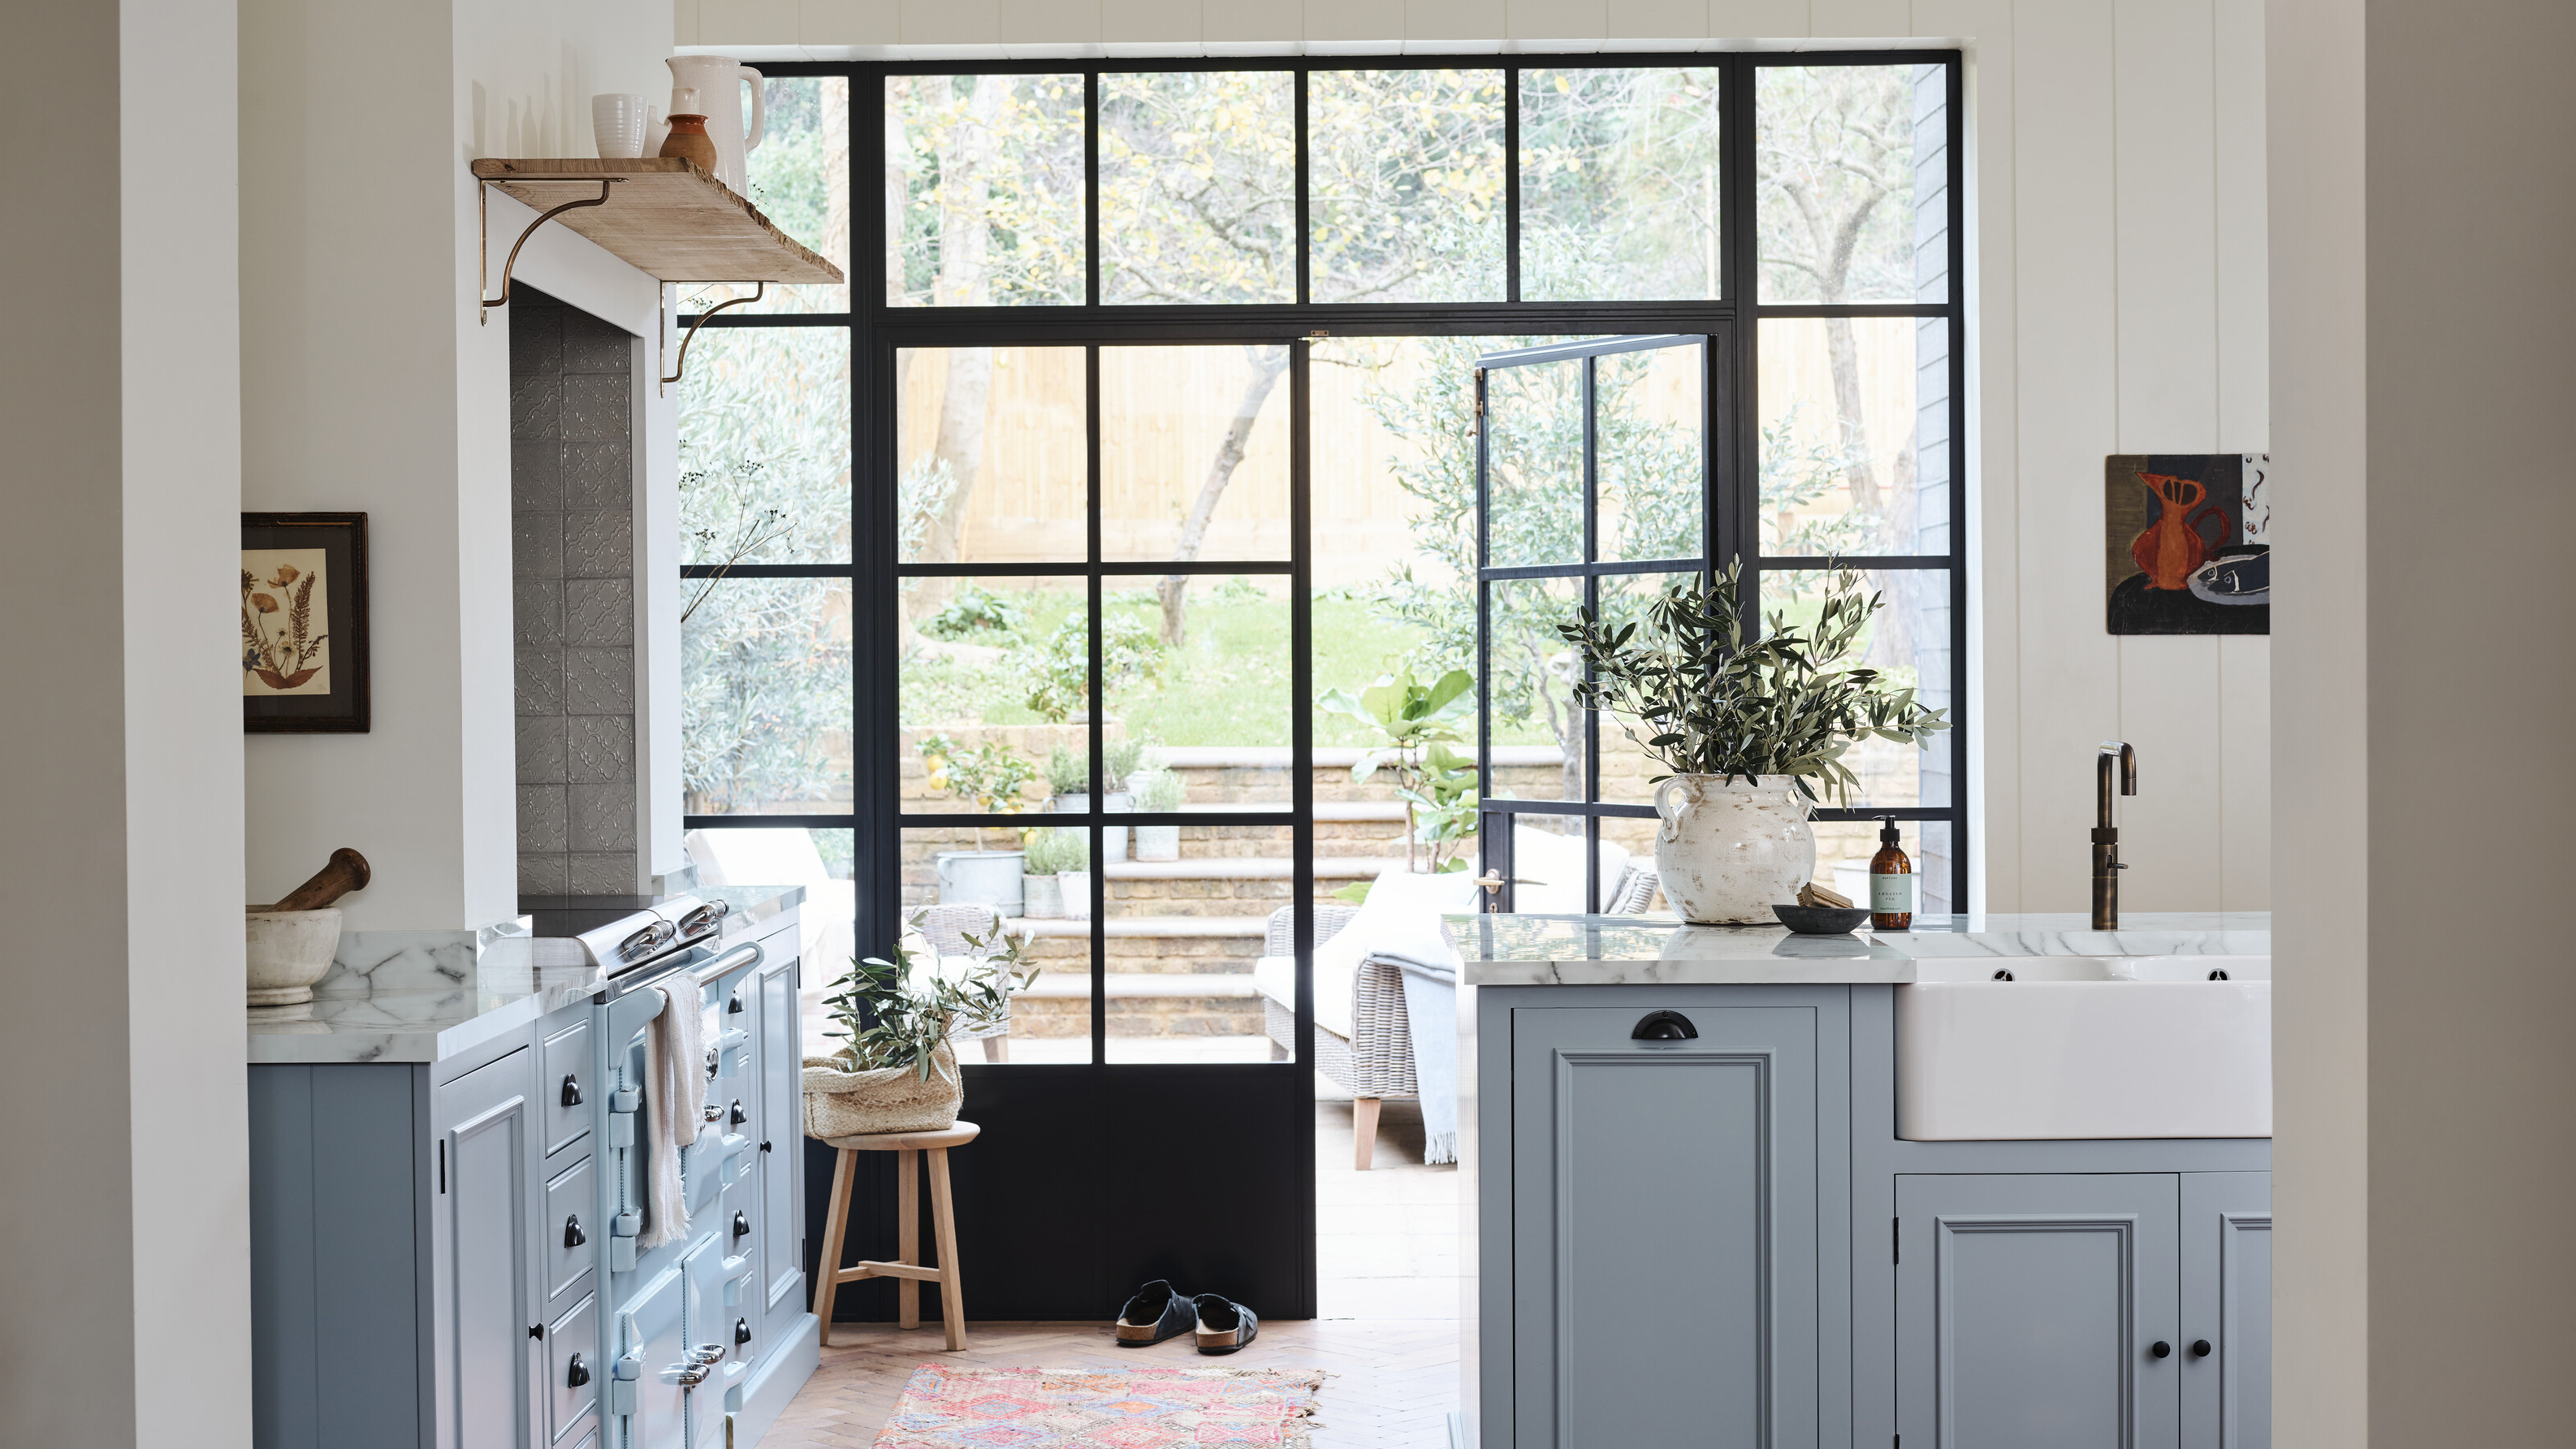 Neptune kitchen designer shares the common mistake when choosing a ...